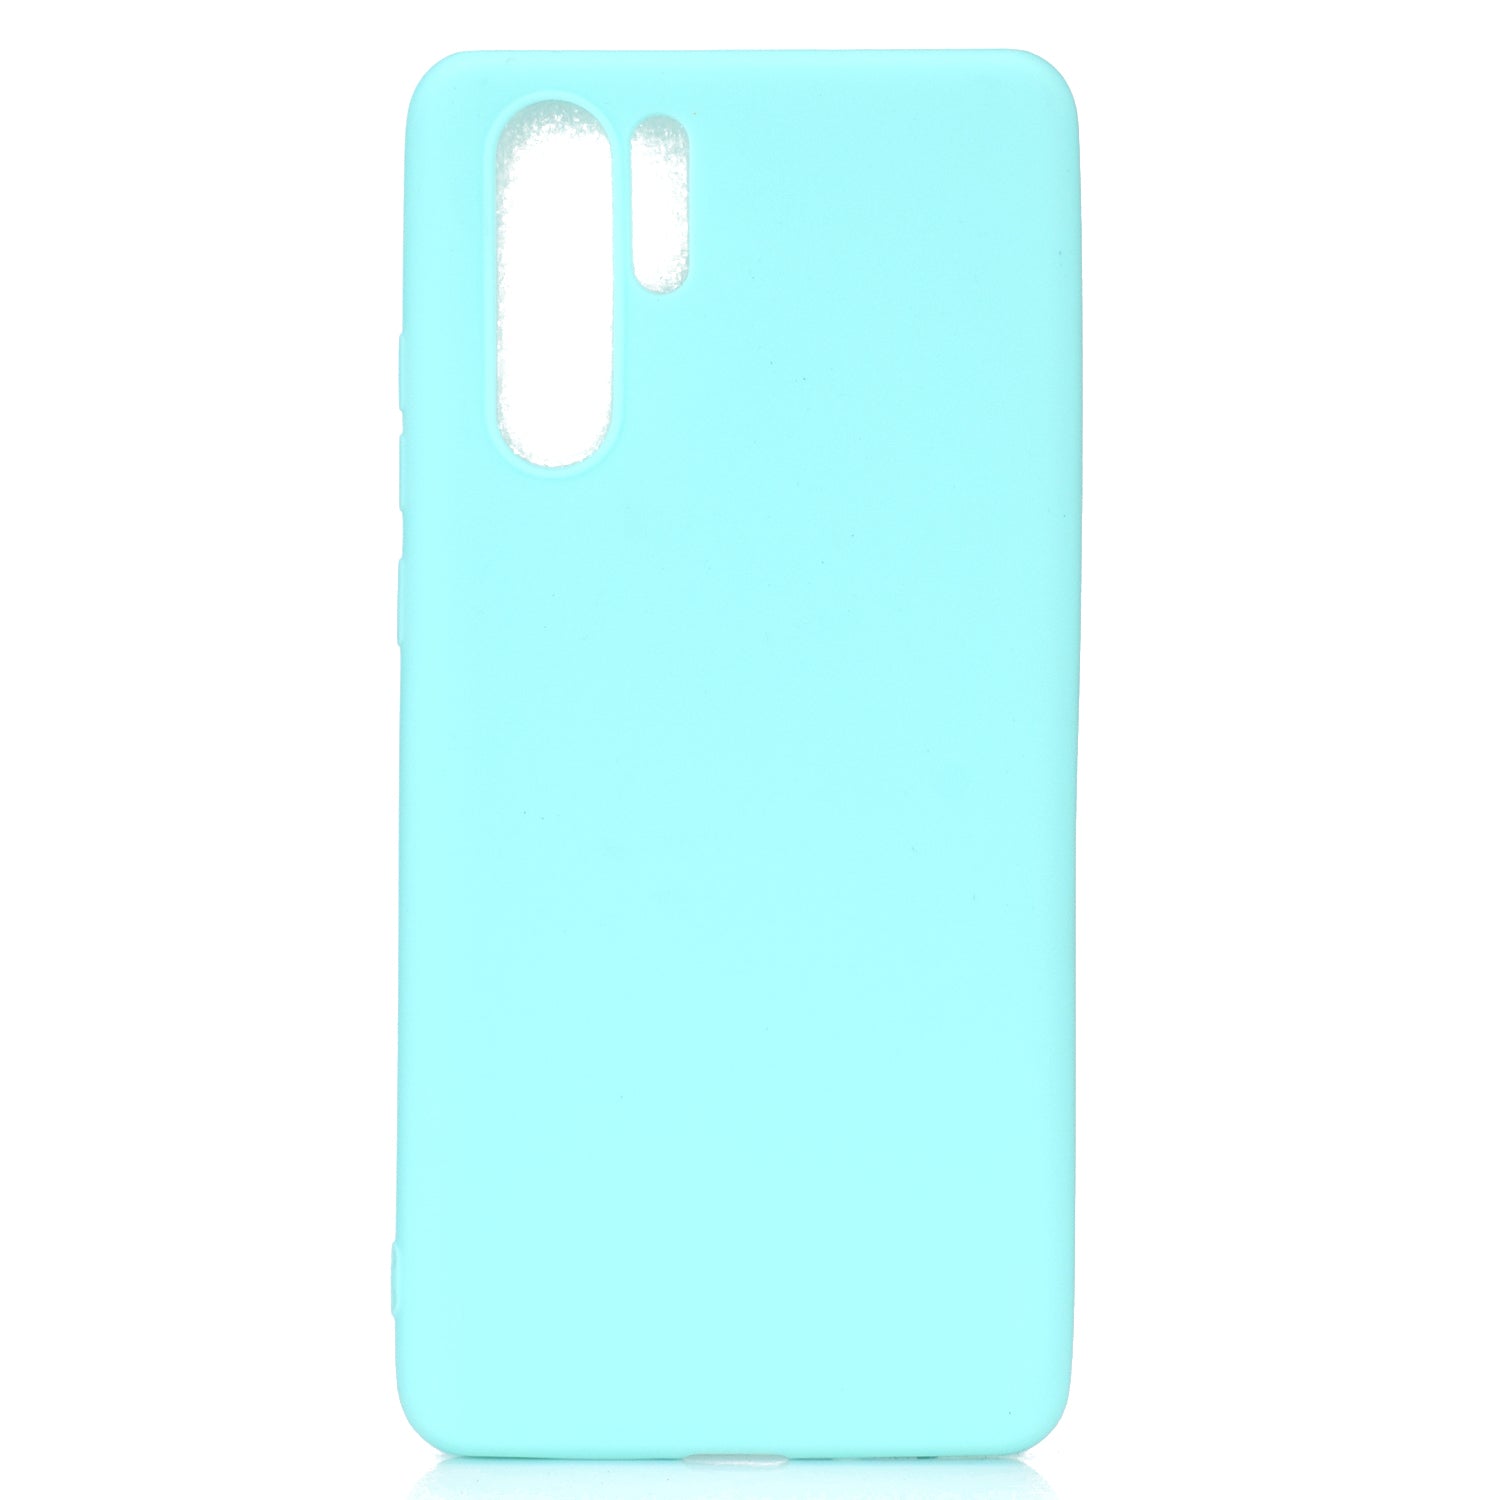 HUAWEI P30 pro Lovely Candy Color Matte TPU Anti-scratch Non-slip Protective Cover Back Case white ZopiStyle